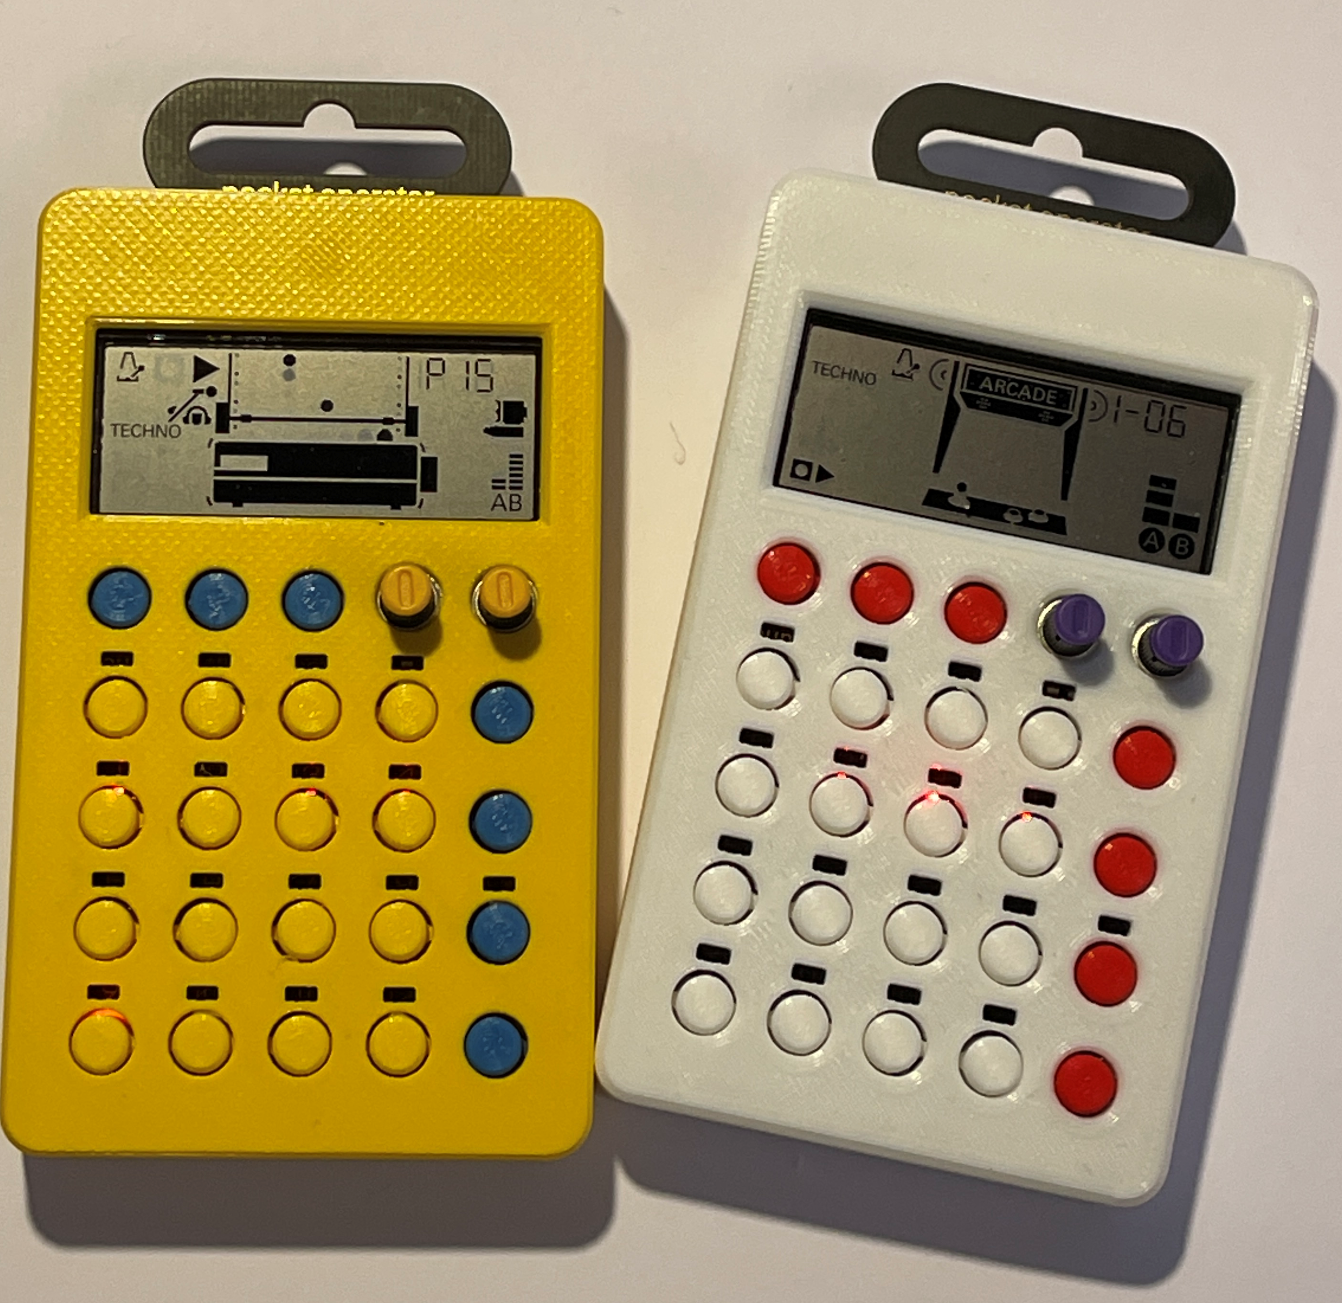 Printing Pocket Operator Cases with Edna —